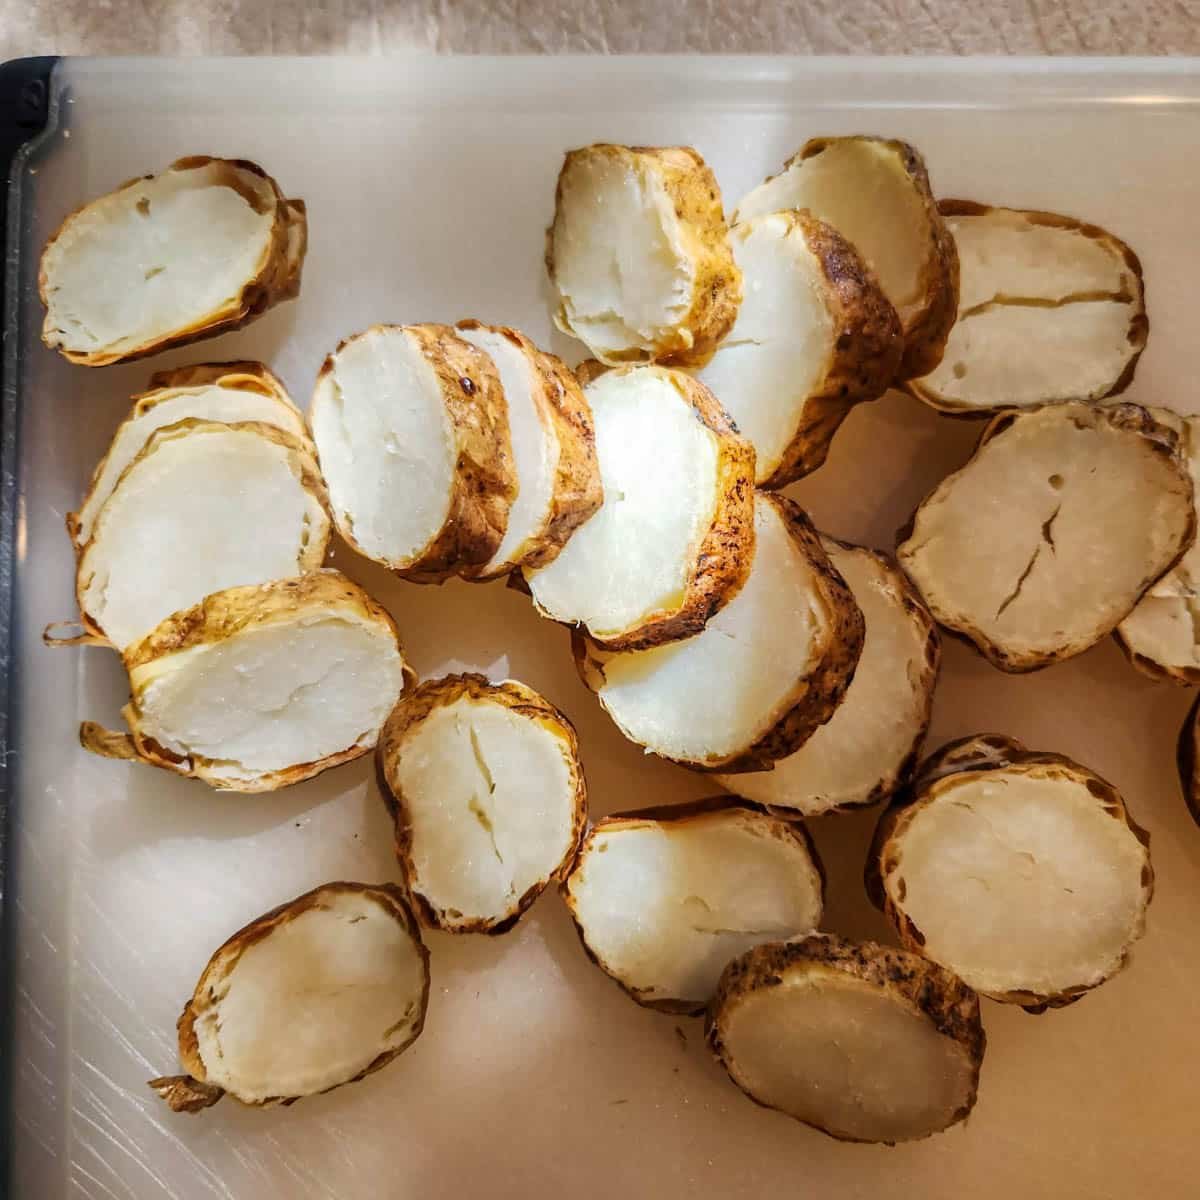 leftover baked potatoes sliced into ½ inch rounds